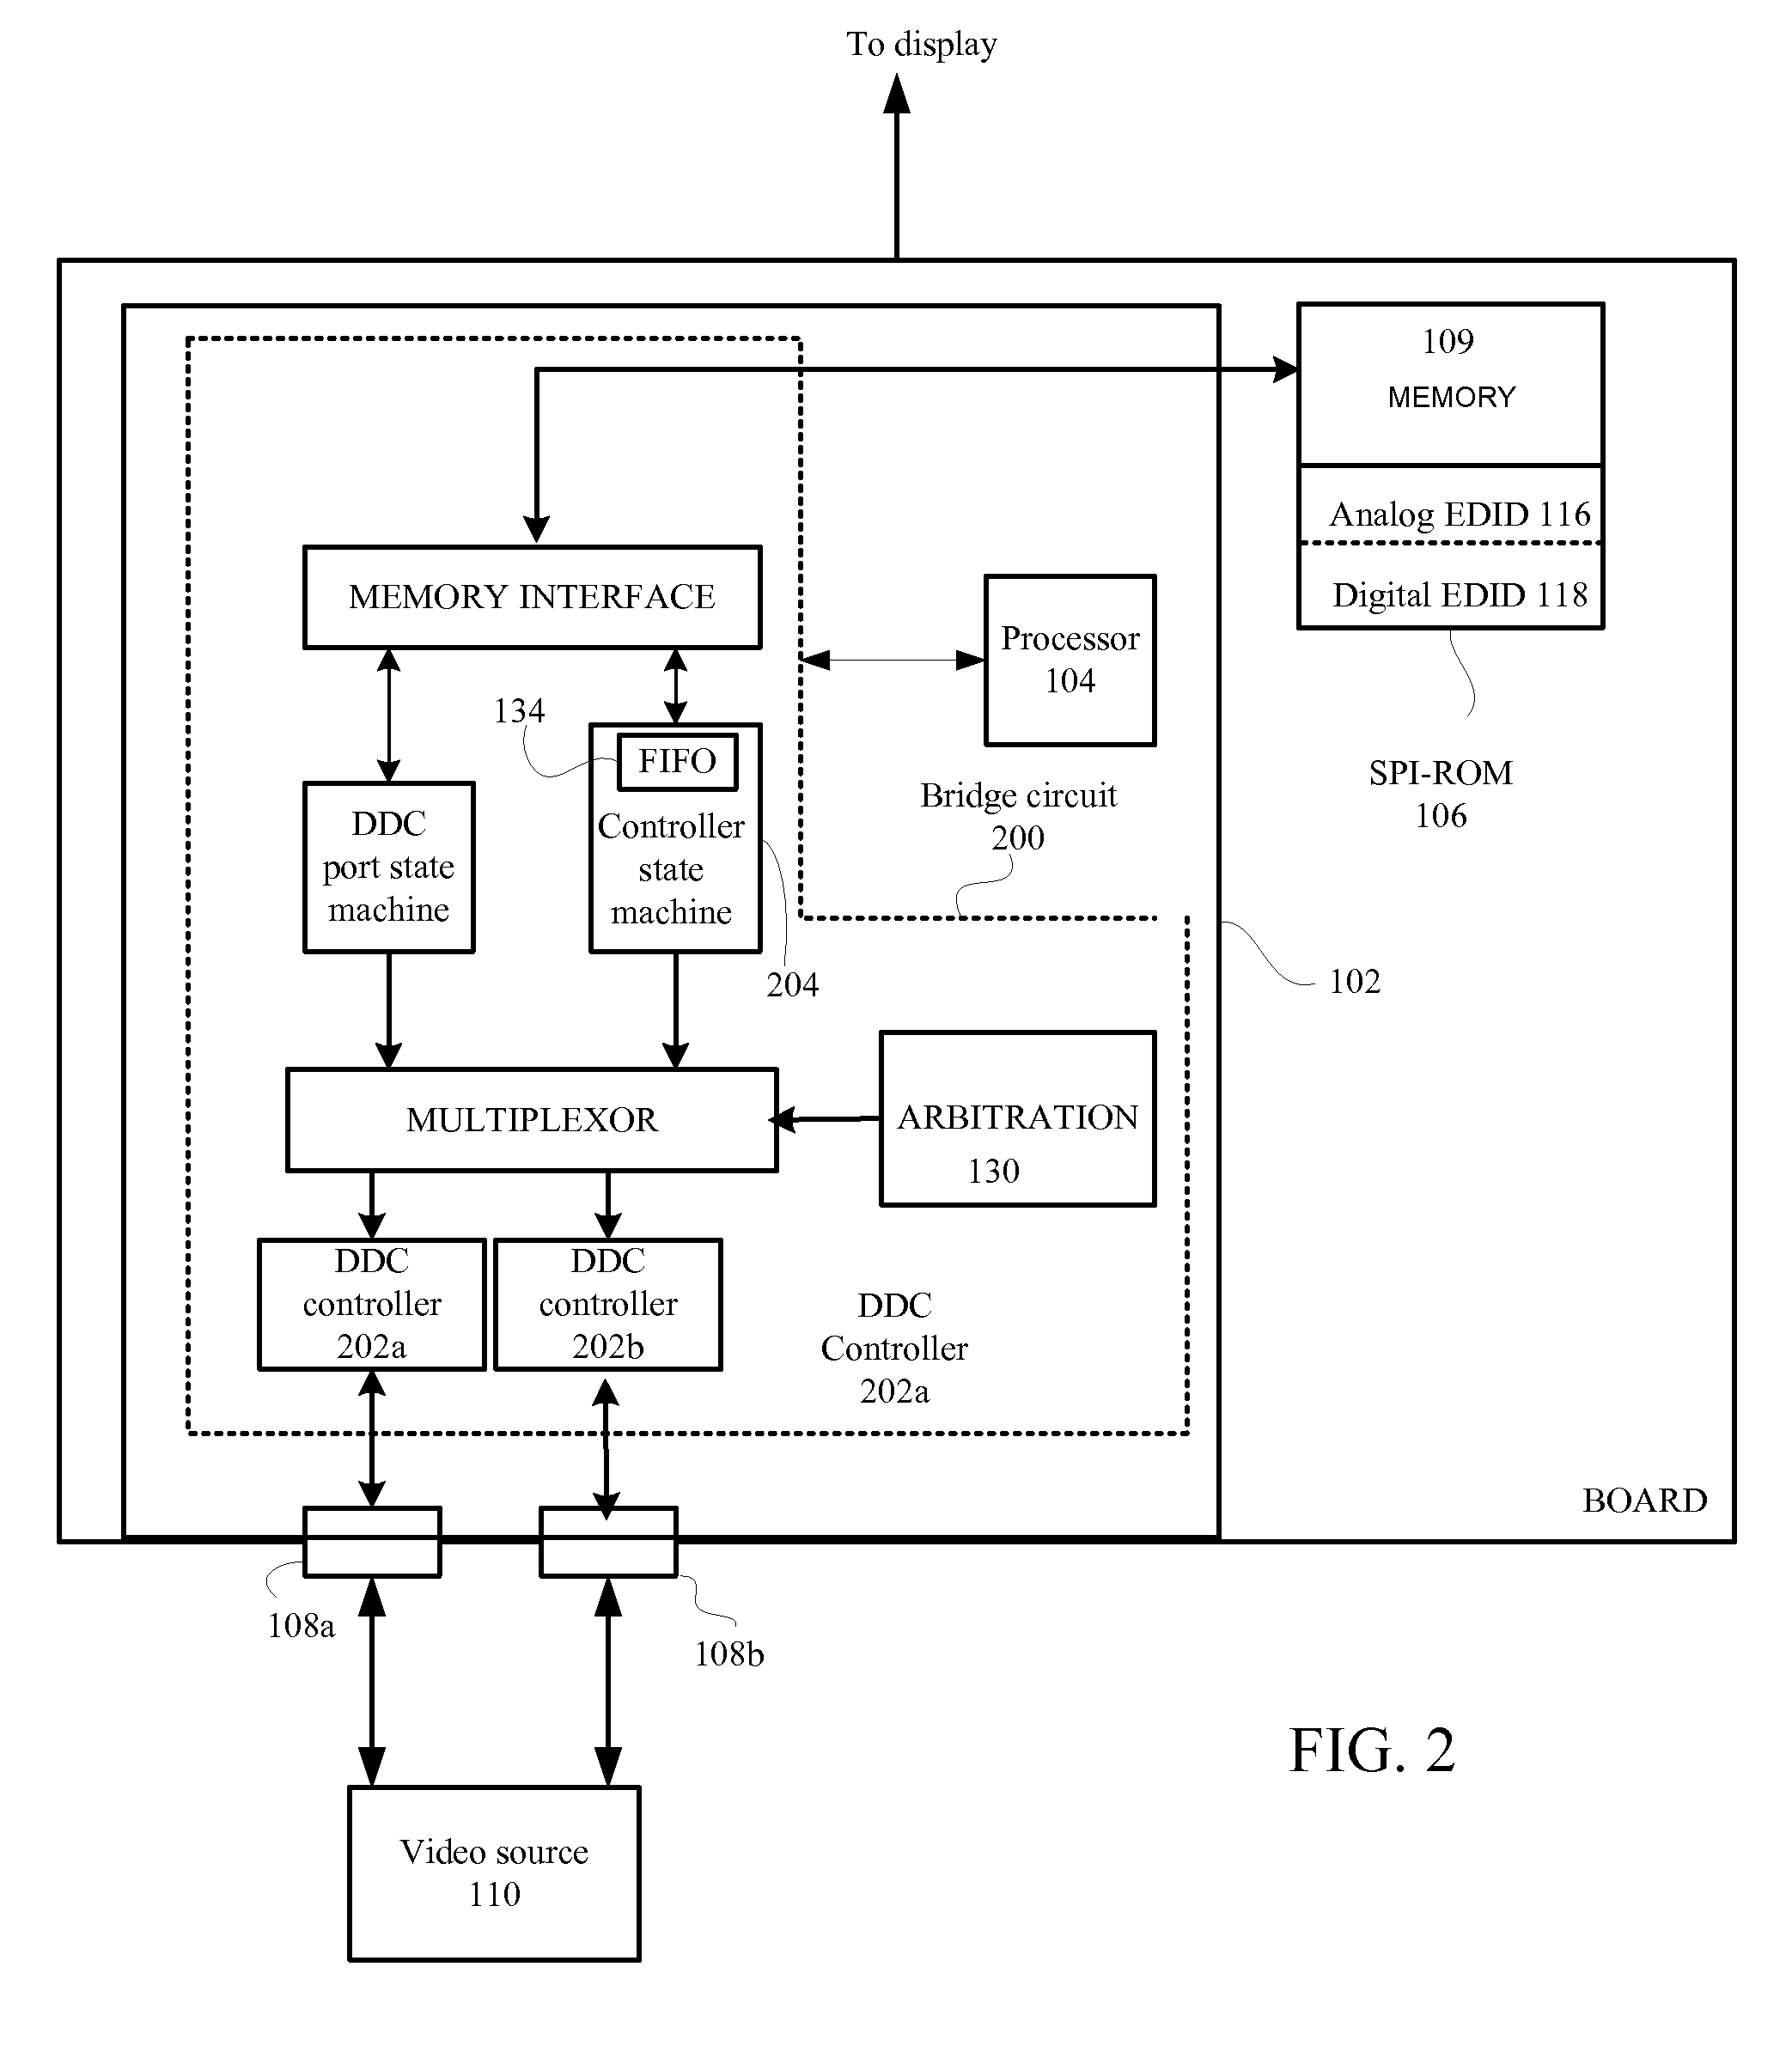 Method for acquiring extended display identification data (EDID) in a powered down EDID compliant display controller